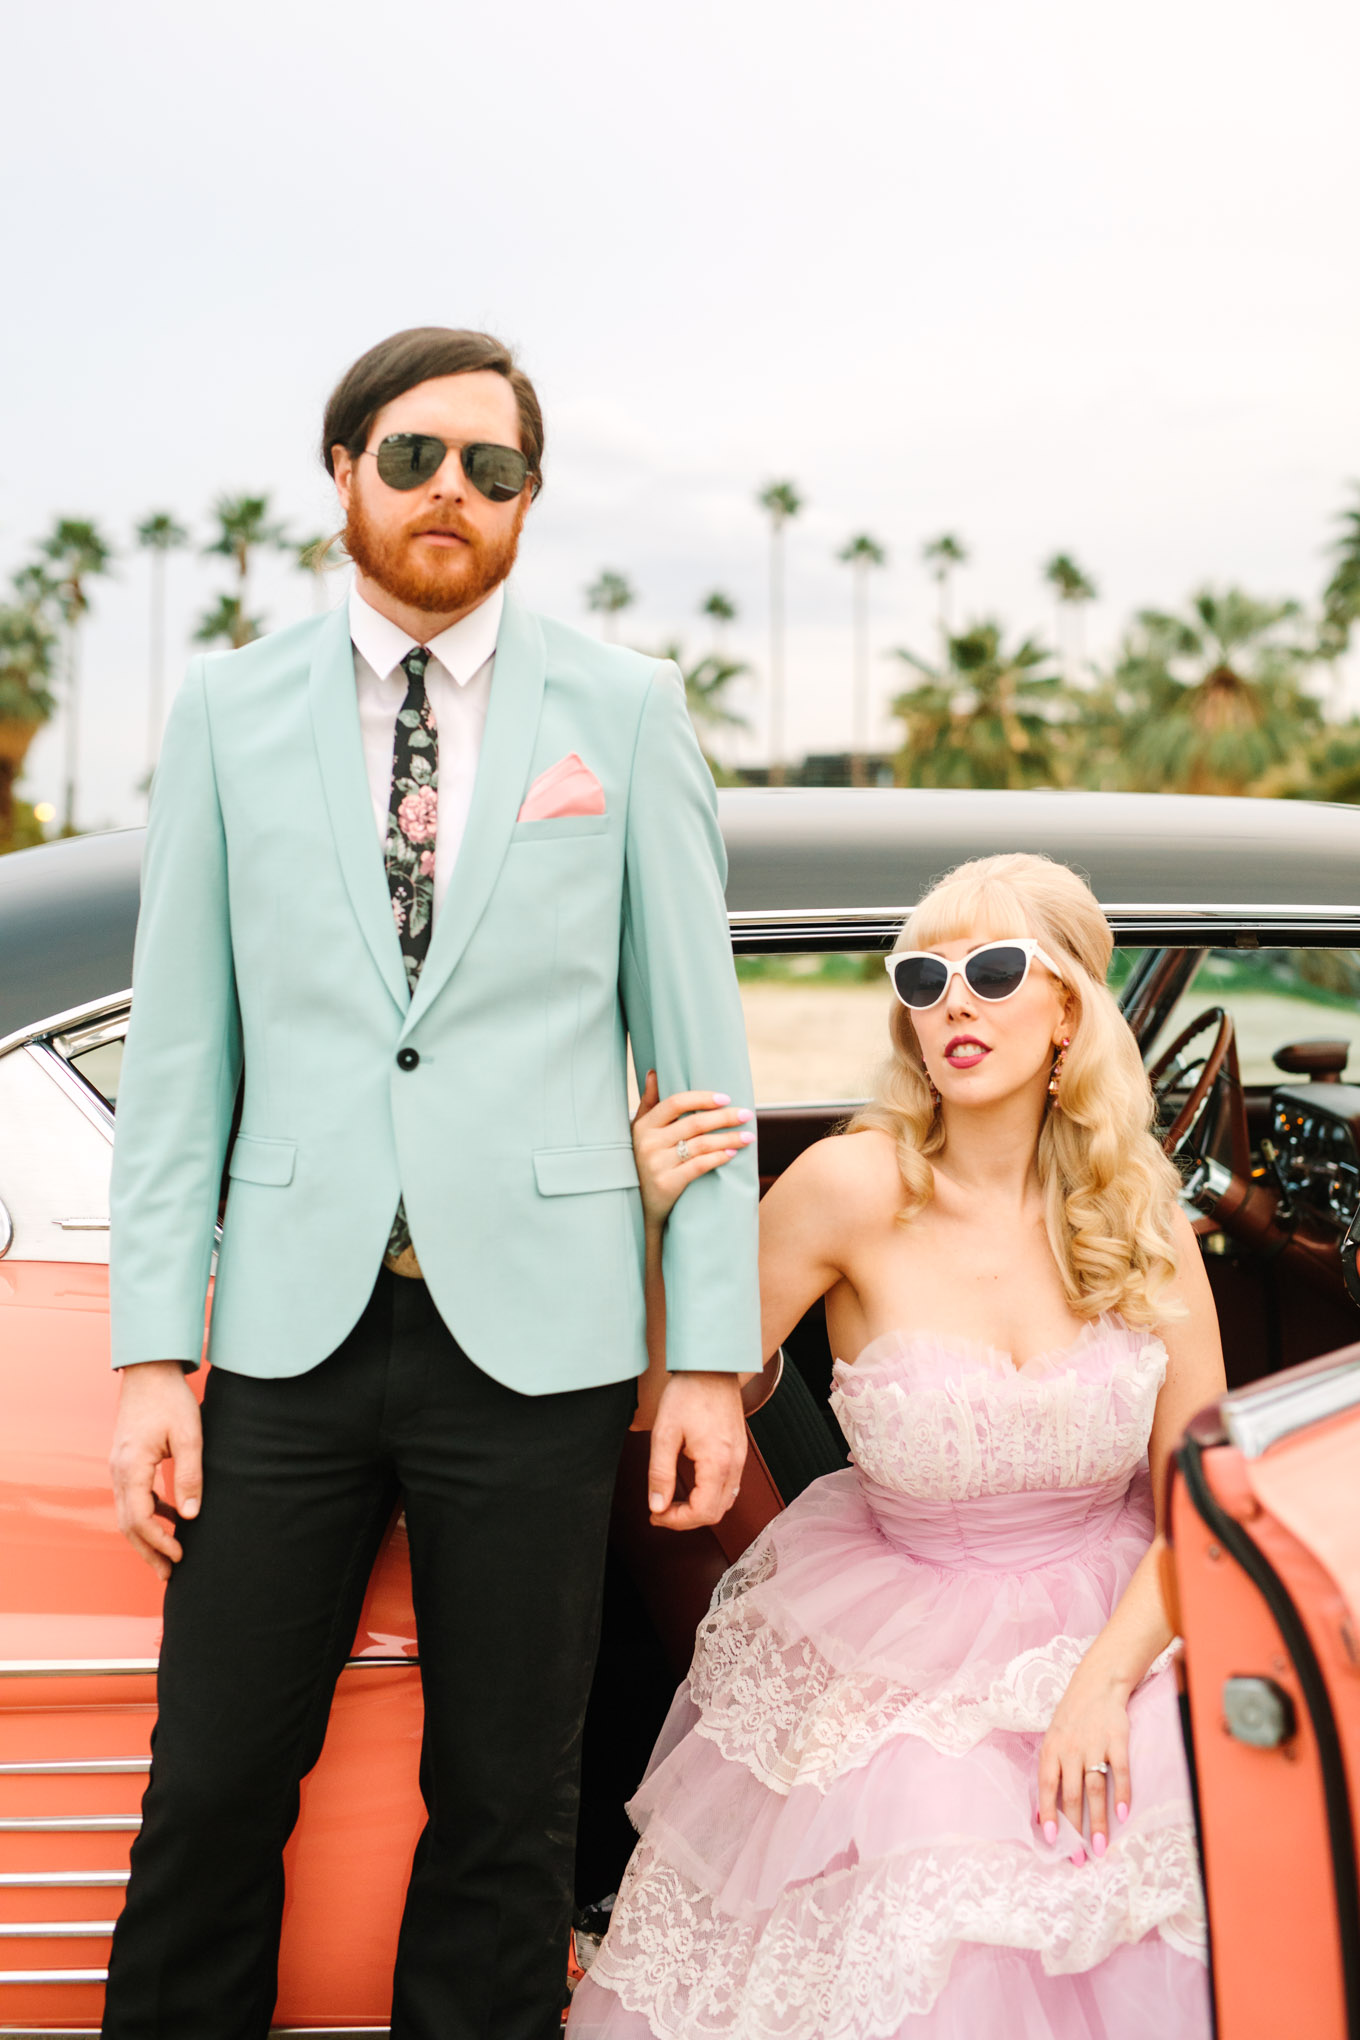 Bride and groom with classic car. Modern vintage-inspired Palm Springs engagement session with a 1960s pink Cadillac, retro clothing, and flowers by Shindig Chic. | Colorful and elevated wedding inspiration for fun-loving couples in Southern California | #engagementsession #PalmSpringsengagement #vintageweddingdress #floralcar #pinkcar   Source: Mary Costa Photography | Los Angeles